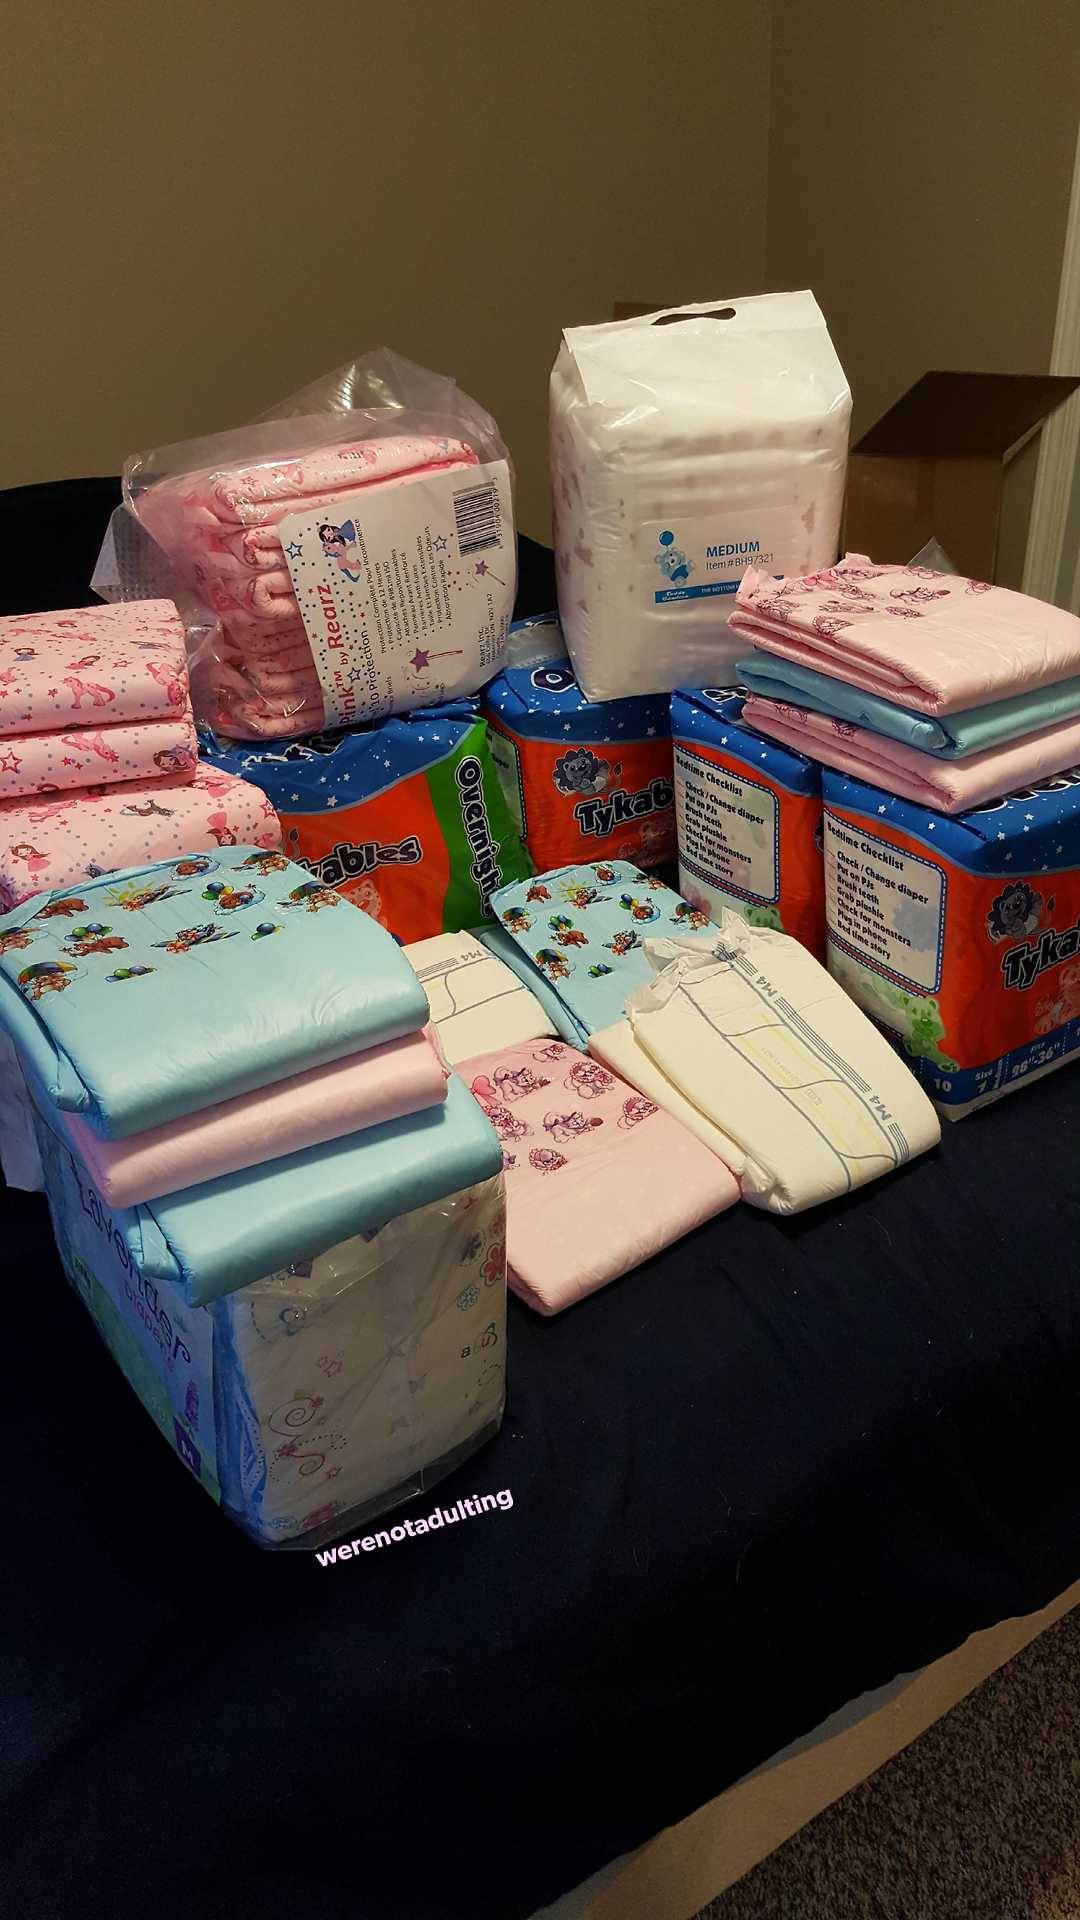 The return of the throne of diapers  